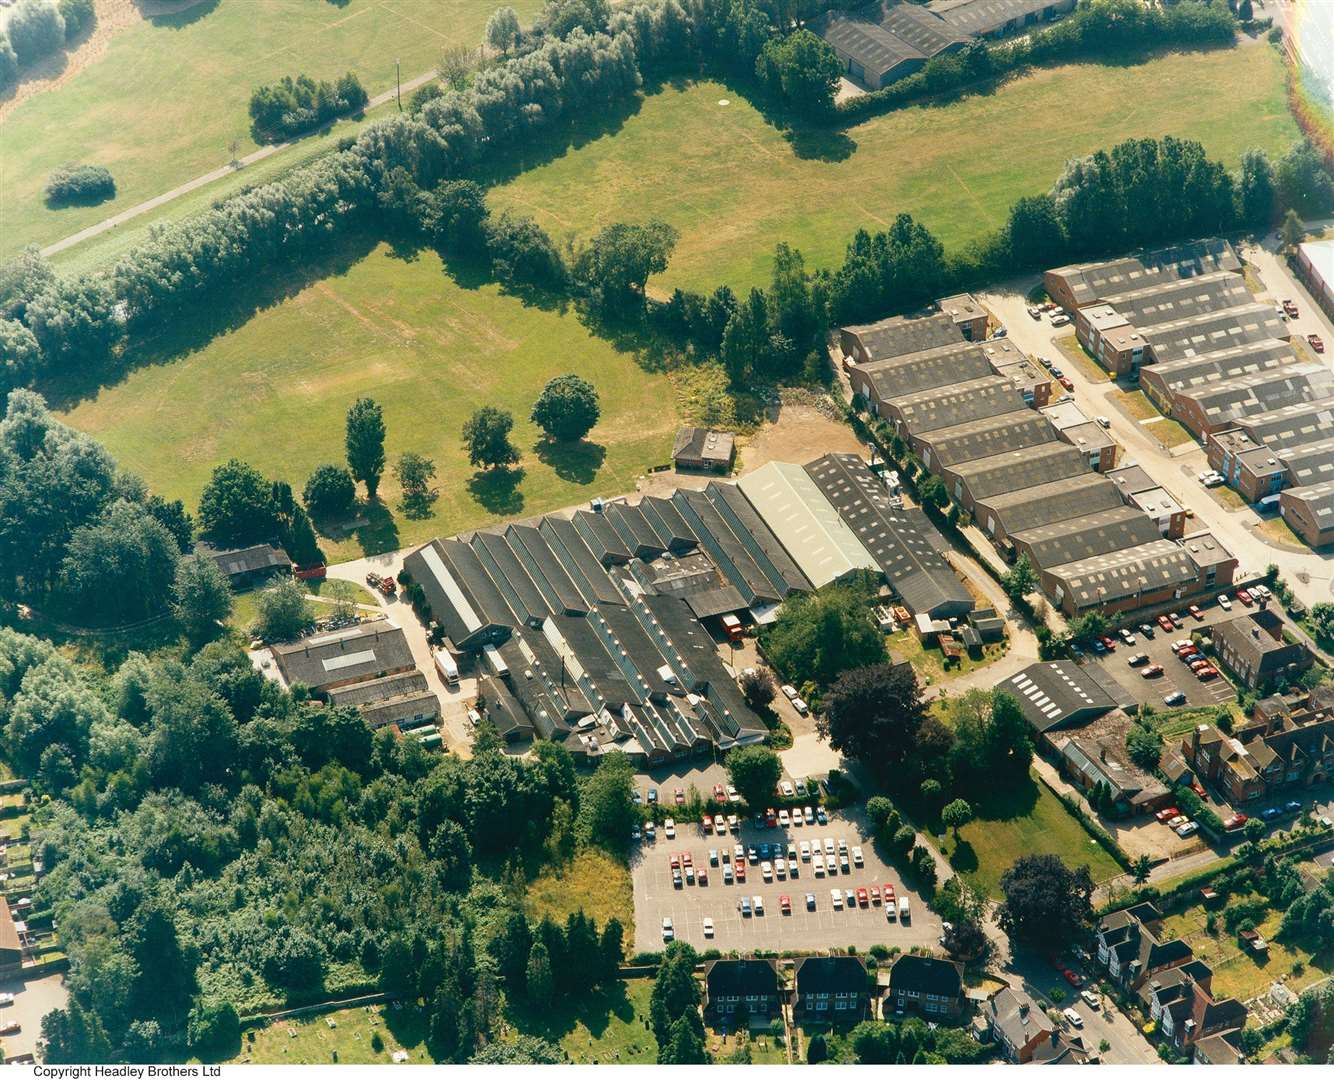 Ashford's Headley Brothers site pictured in the 90s. Founded in 1881 by brothers Herbert and Burgess Headley to print paper bags, bill heads and circulars for Ashford businesses, the Lower Queens Road site was demolished in February 2019. Pic: Steve Salter